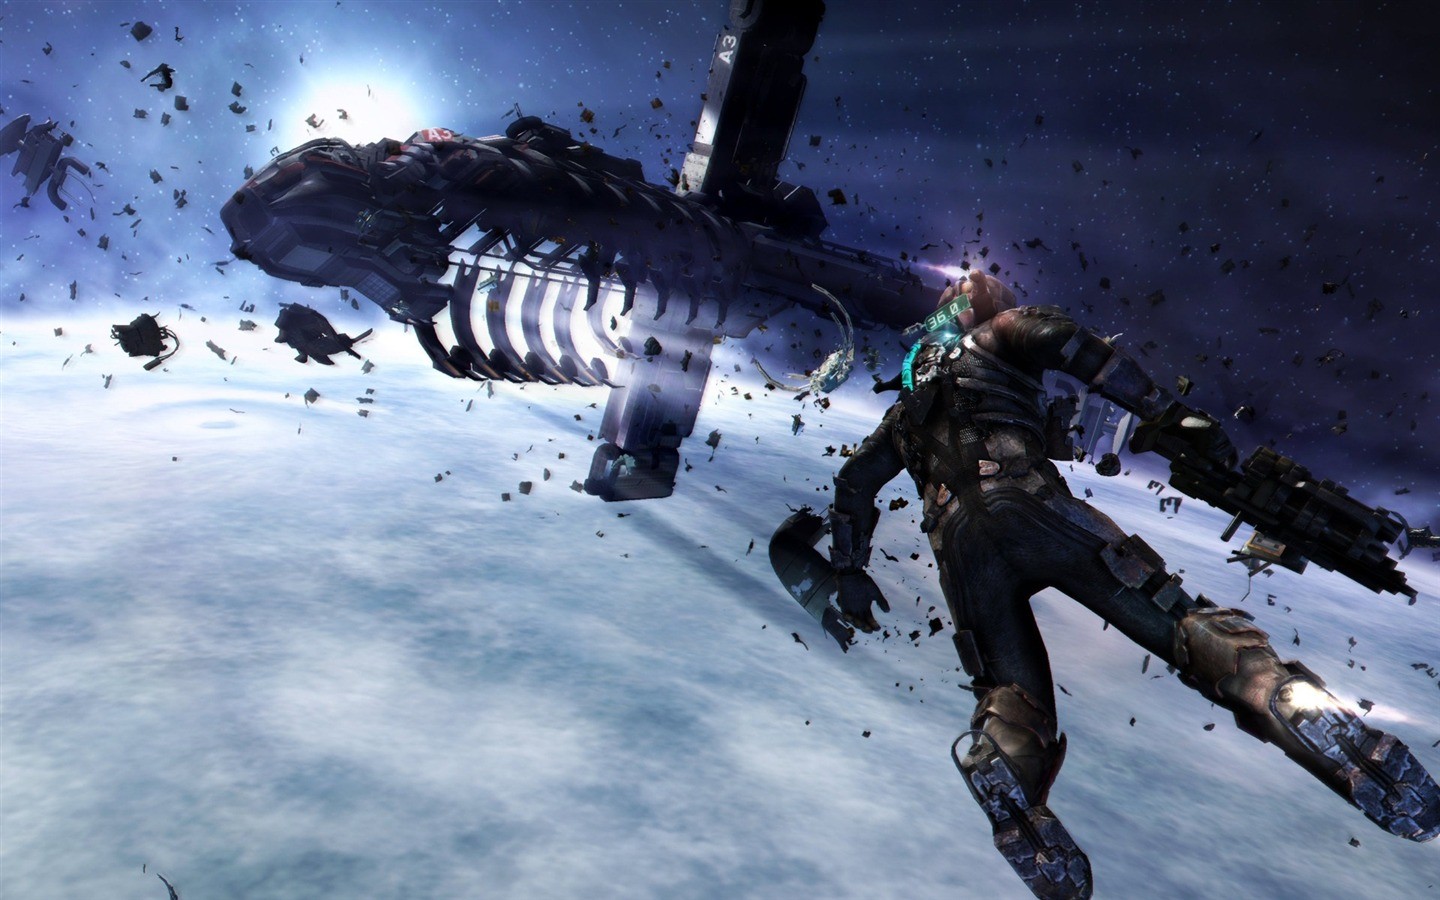 outer, Space, Dead, Space, Dead, Space Wallpaper